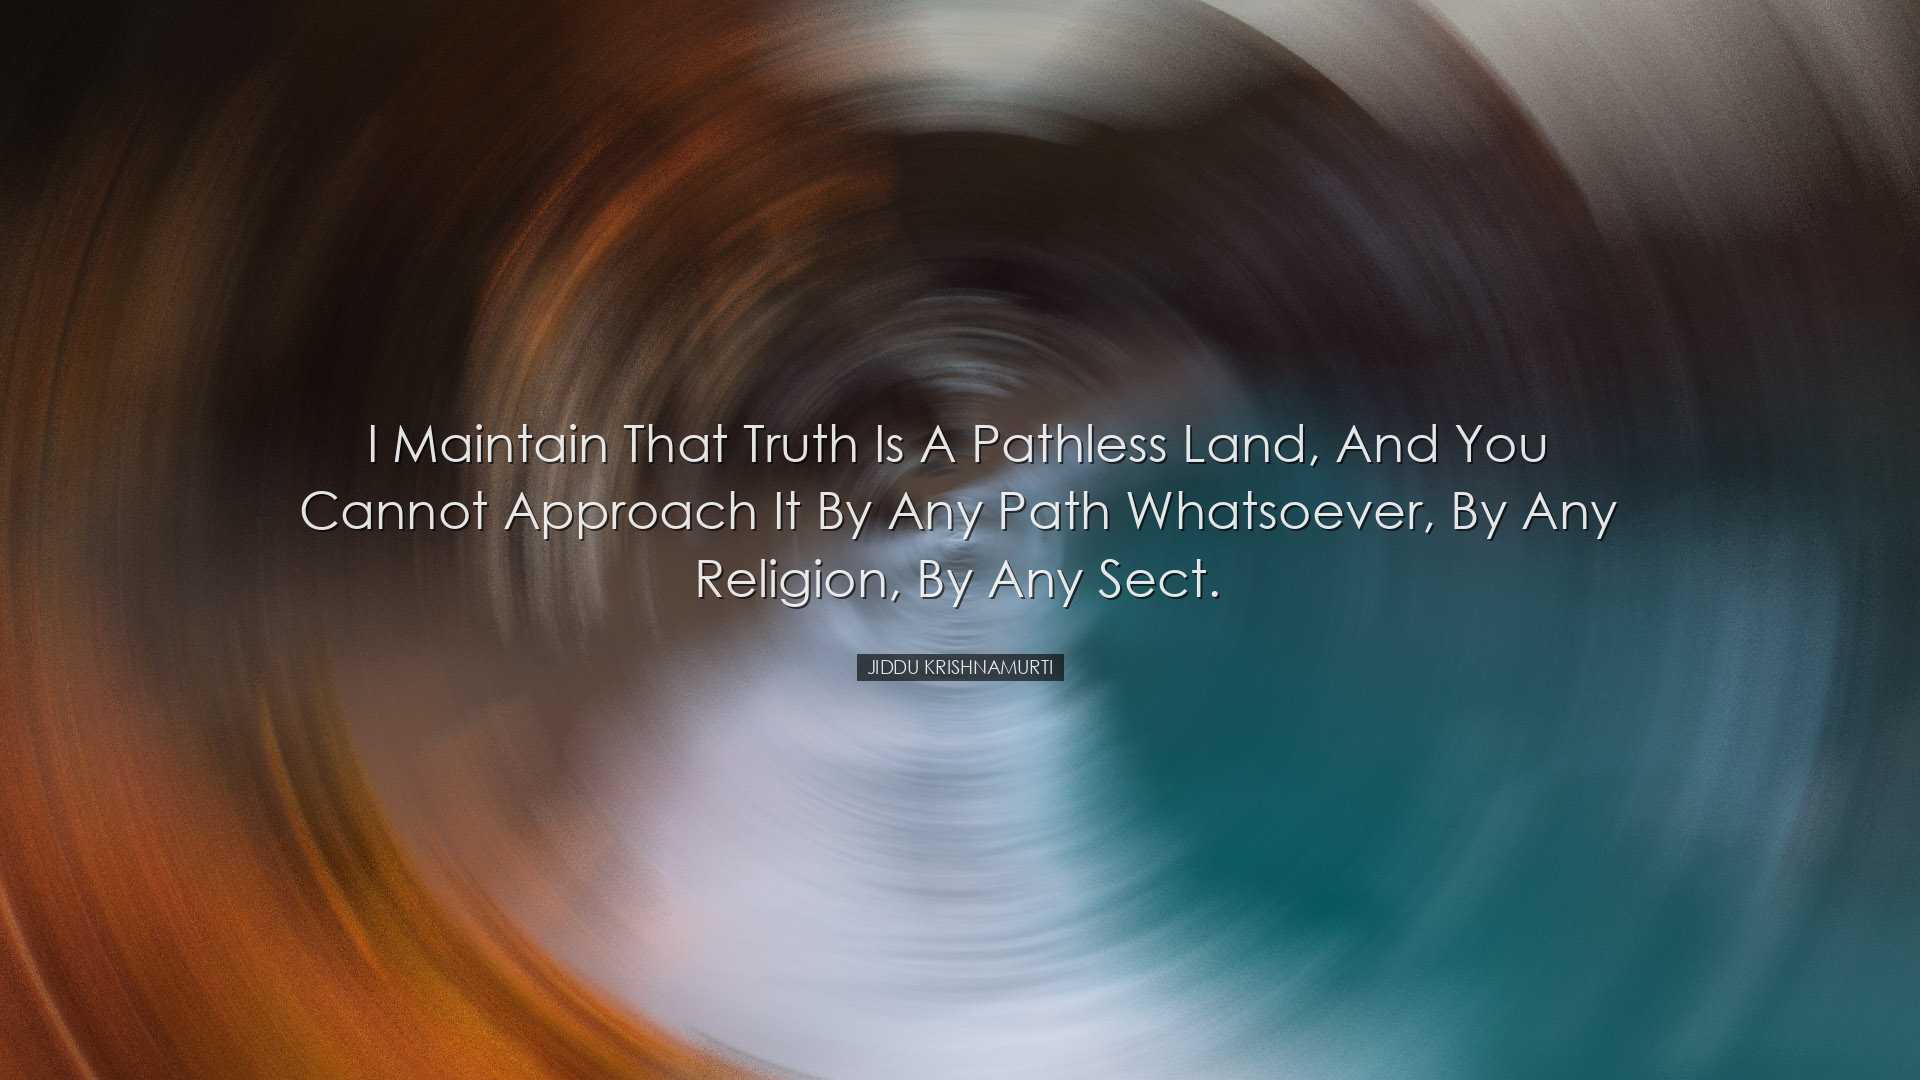 I maintain that Truth is a pathless land, and you cannot approach